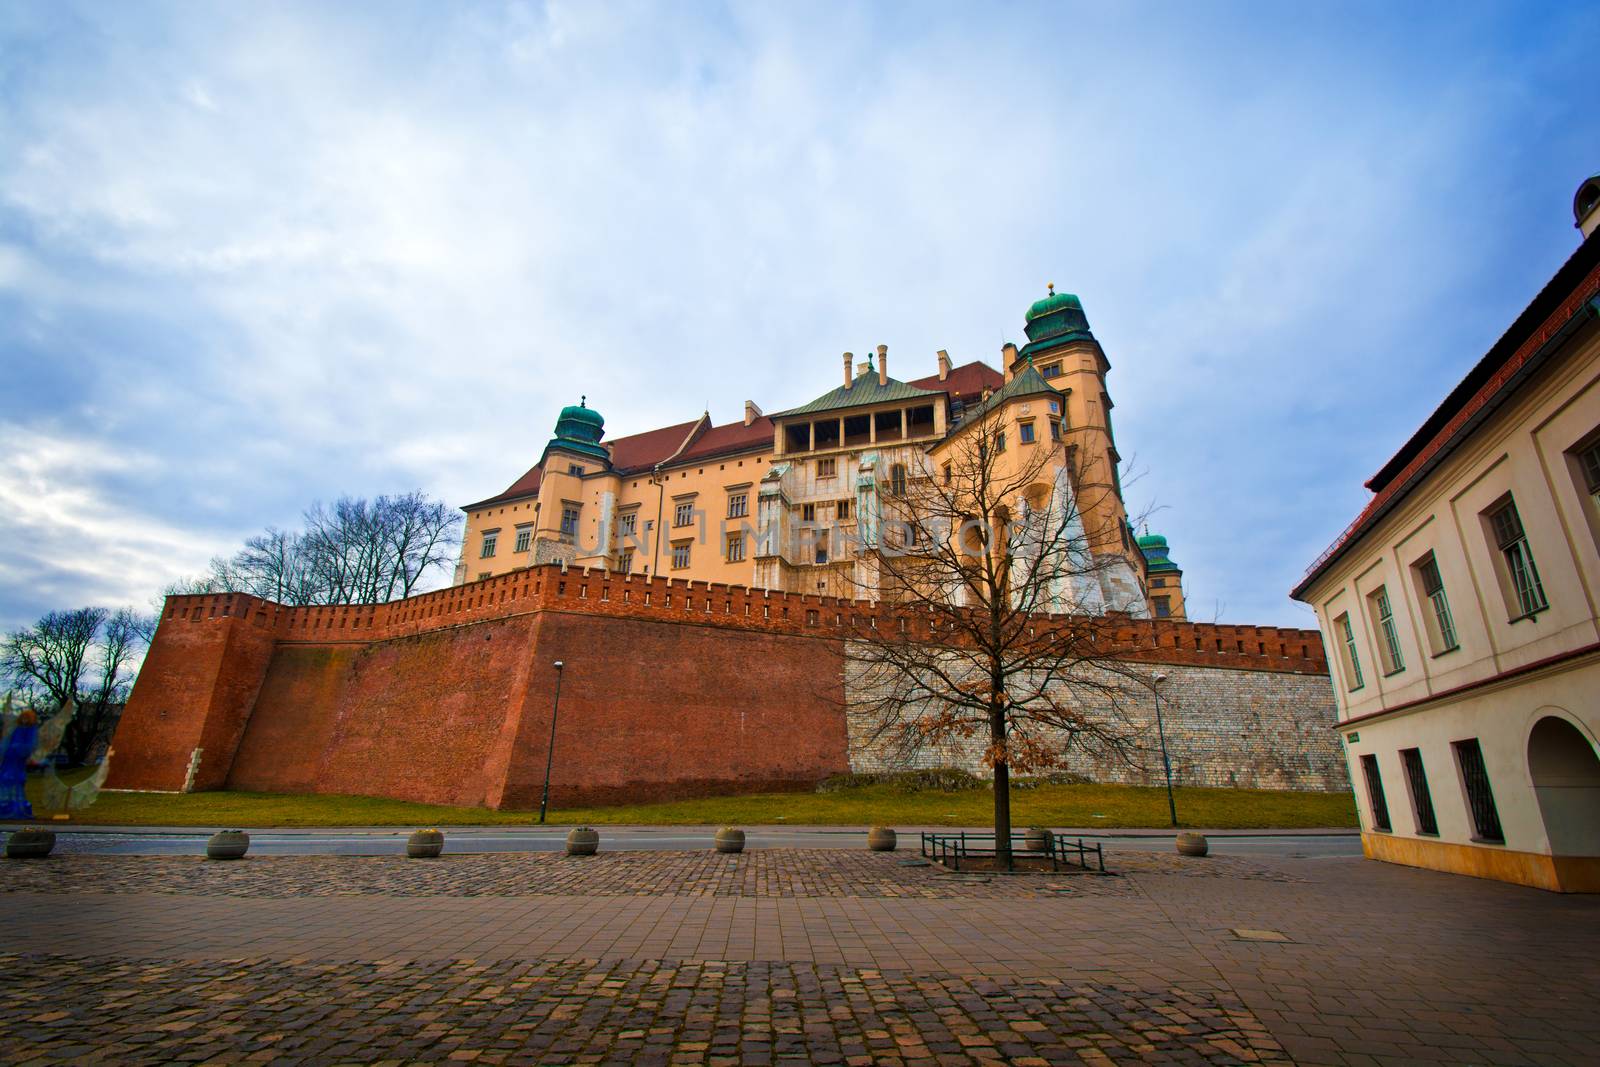 View of Wawel Castle in Cracow, Poland.